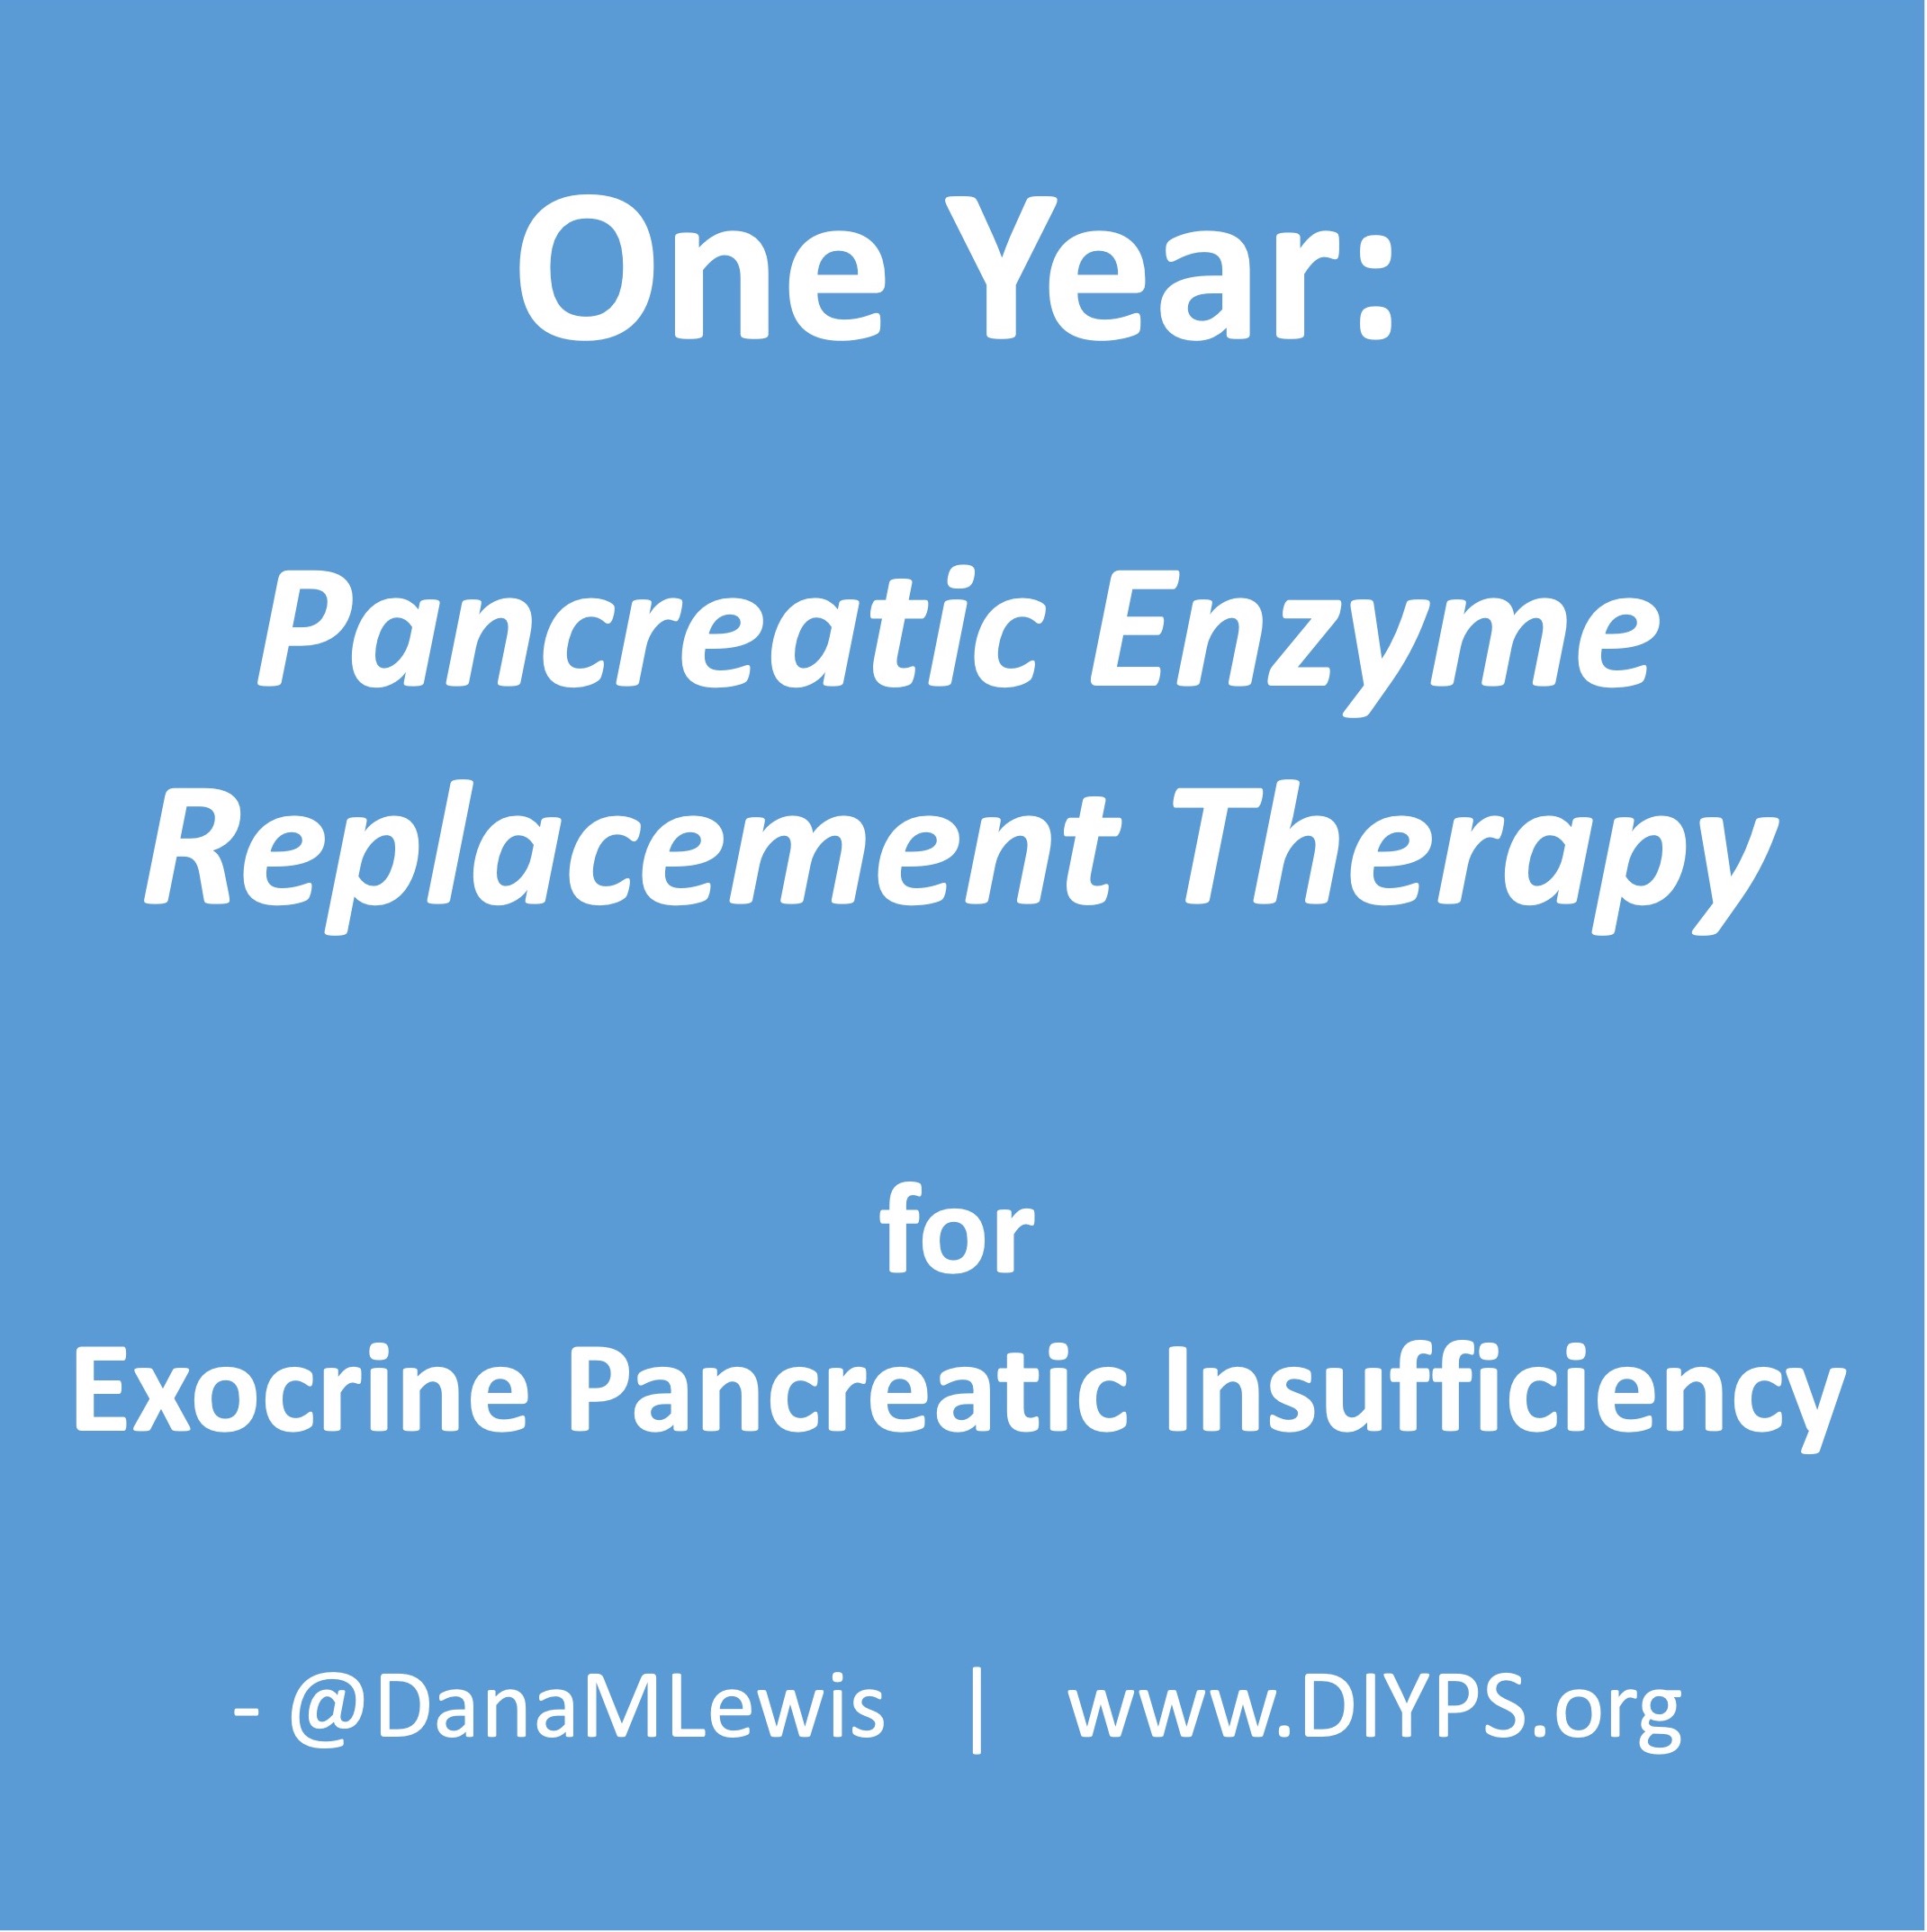 One year of pancreatic enzyme replacement therapy for EPI by Dana M. Lewis